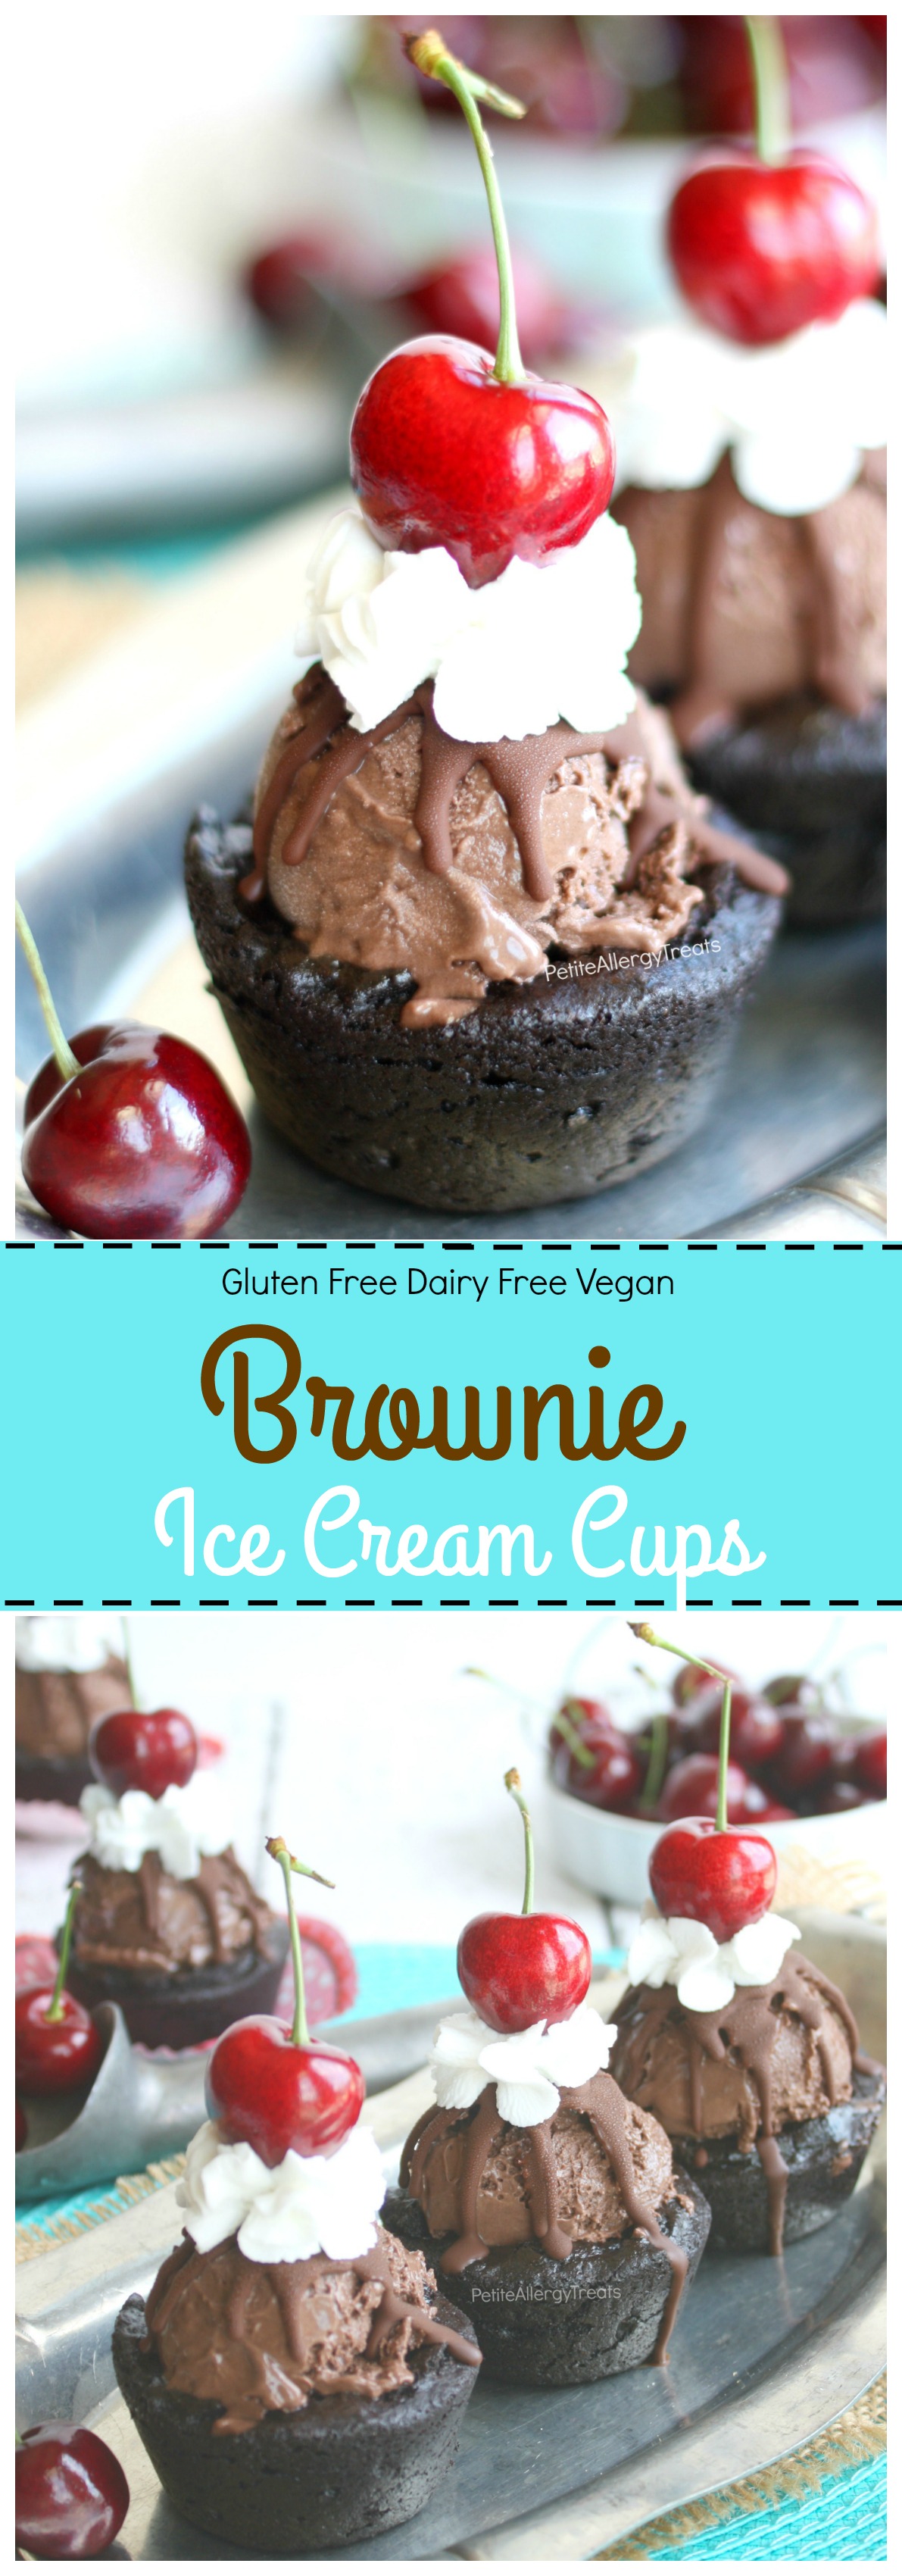 Gluten Free Vegan Brownie Ice Cream Cups Recipe (dairy free)- Edible ice cream brownie bowl made from gluten free chewy brownies.You'd never know it's Food Allergy Friendly.